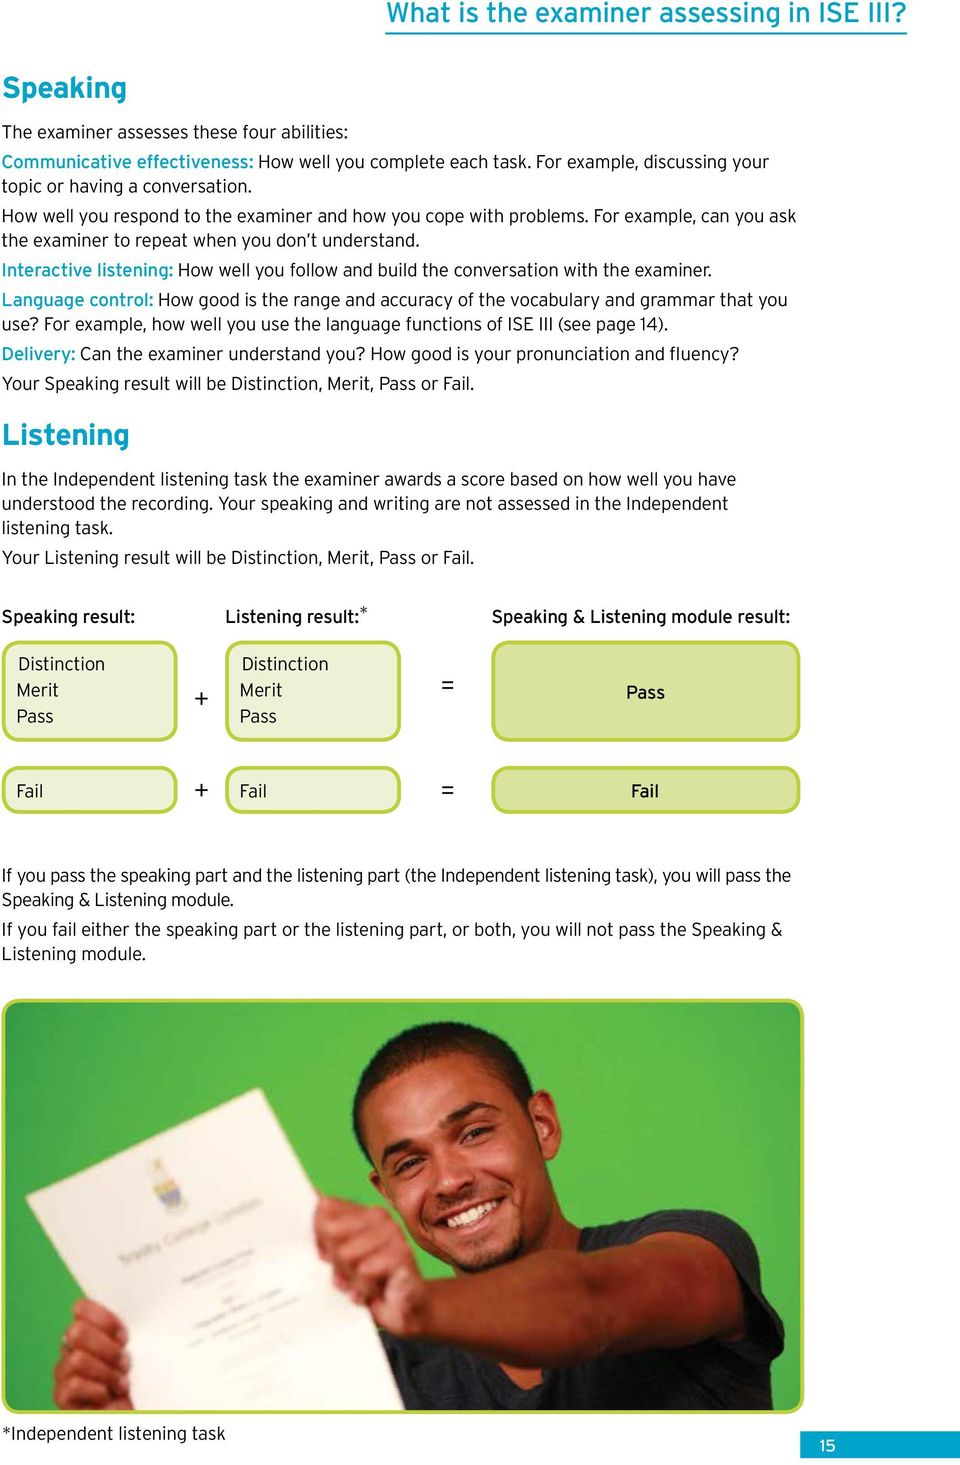 For example, can you ask the examiner to repeat when you don t understand. Interactive listening: How well you follow and build the conversation with the examiner.